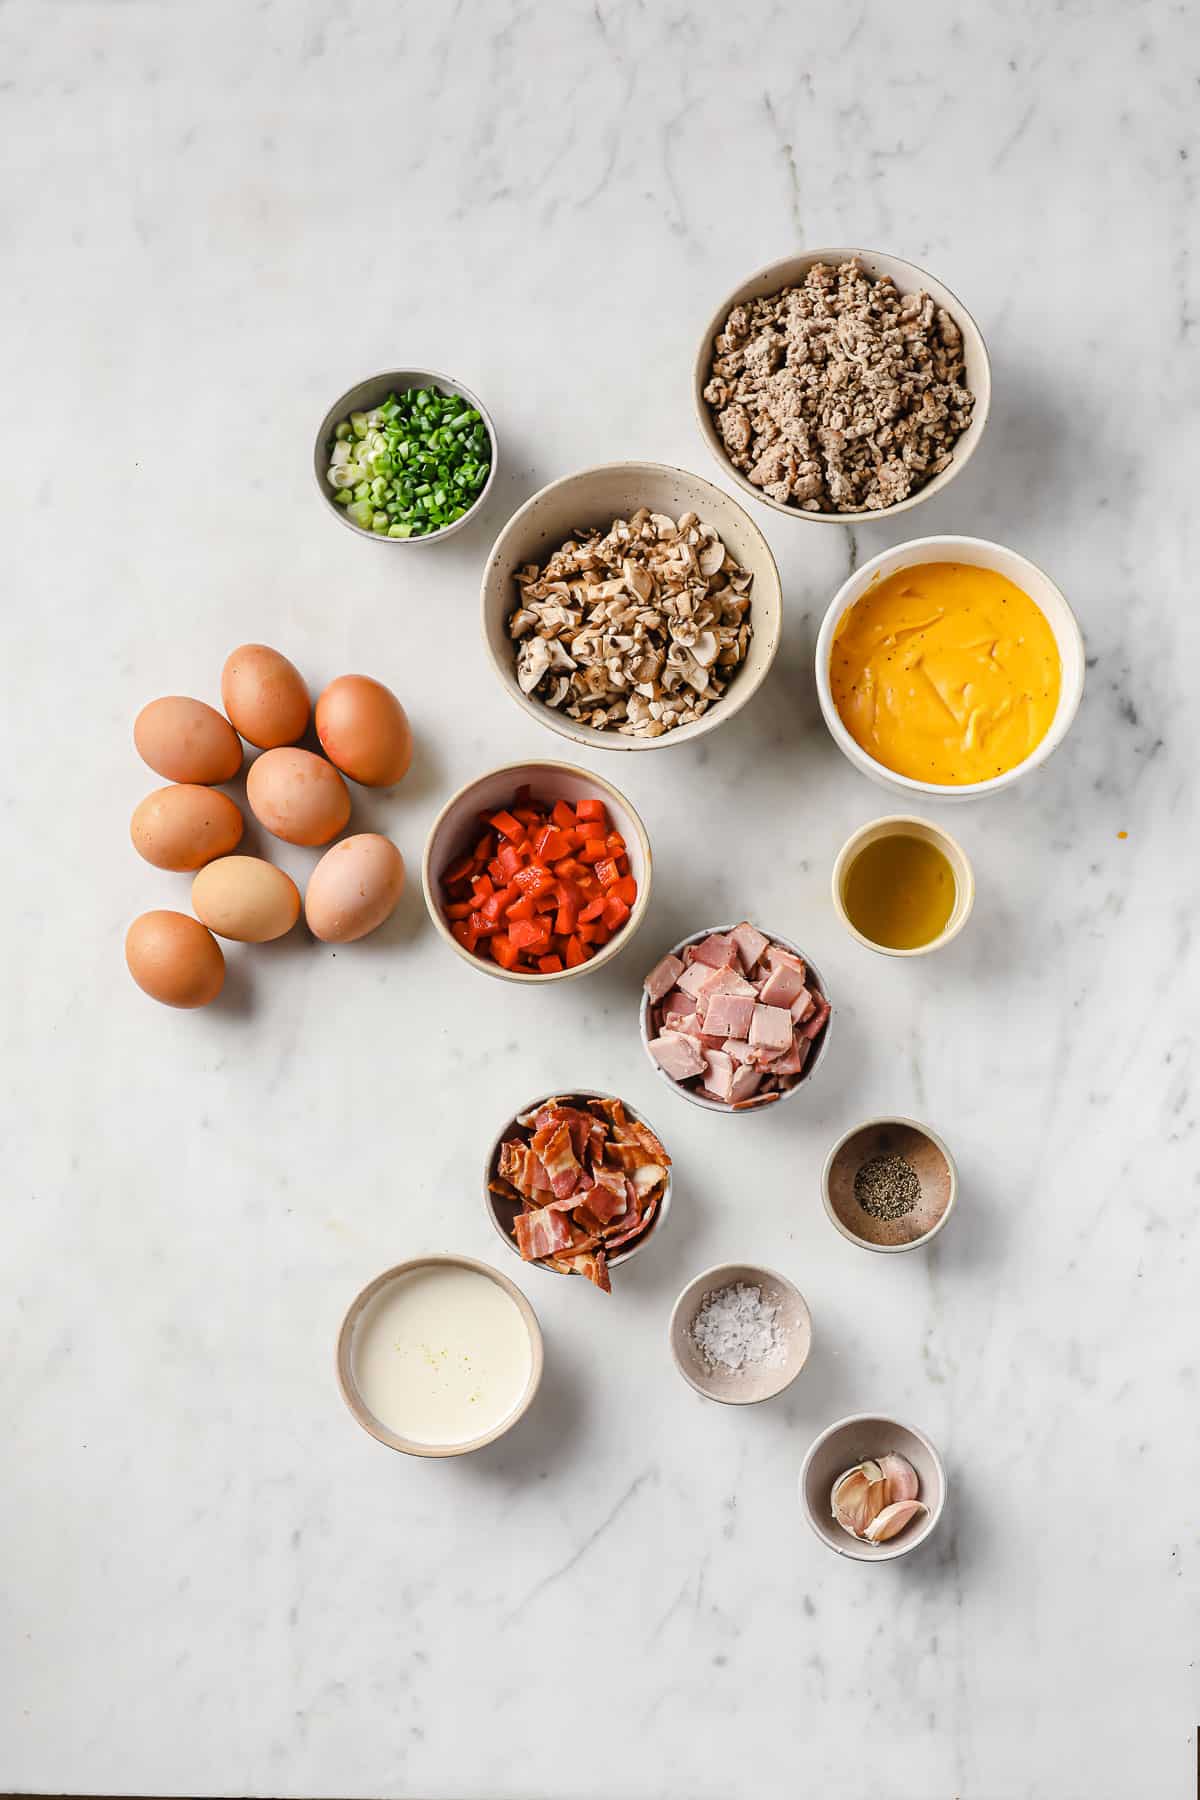 ingredients laid out to make waffle omelets - eggs, sausage, bacon, ham, onions, peppers, mushrooms and cheese sauce.